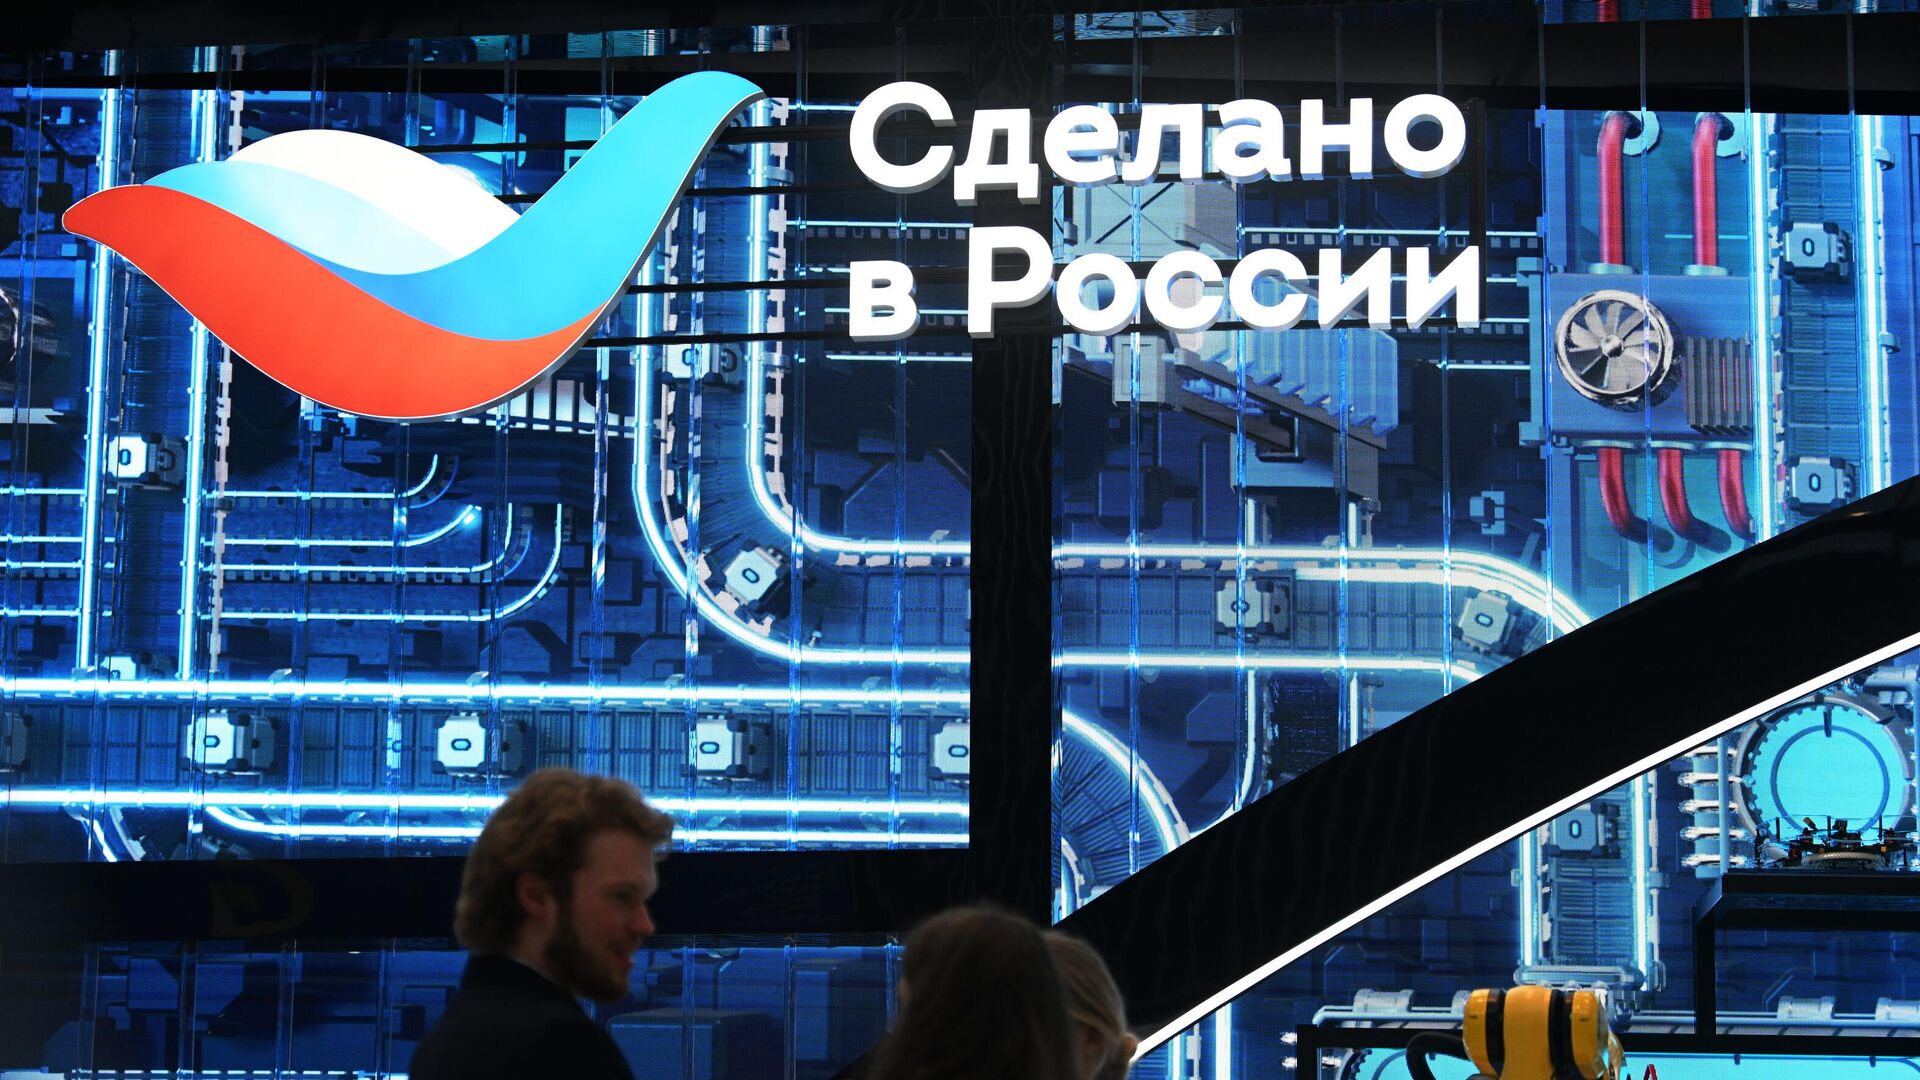 More than 150 companies will participate in the “Made in Russia” technology fair